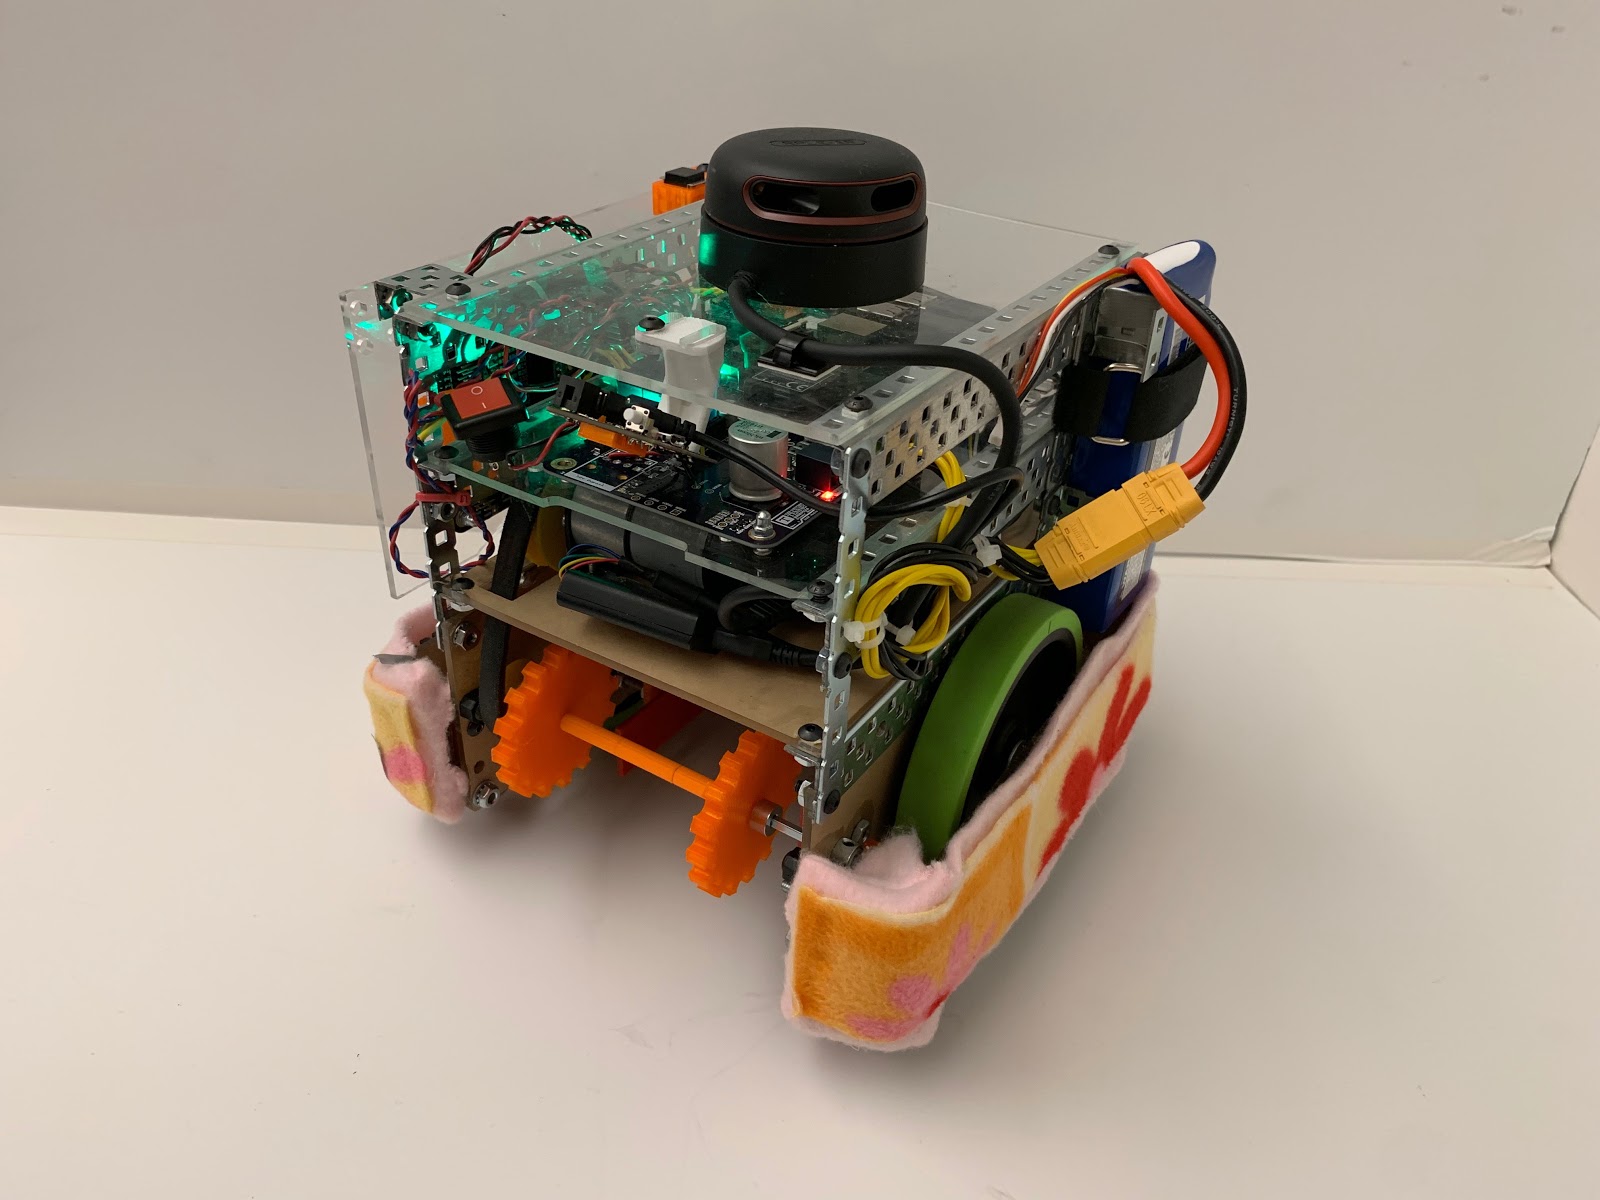 Robot Built for IEEE SoutheastCon Robotics Competition